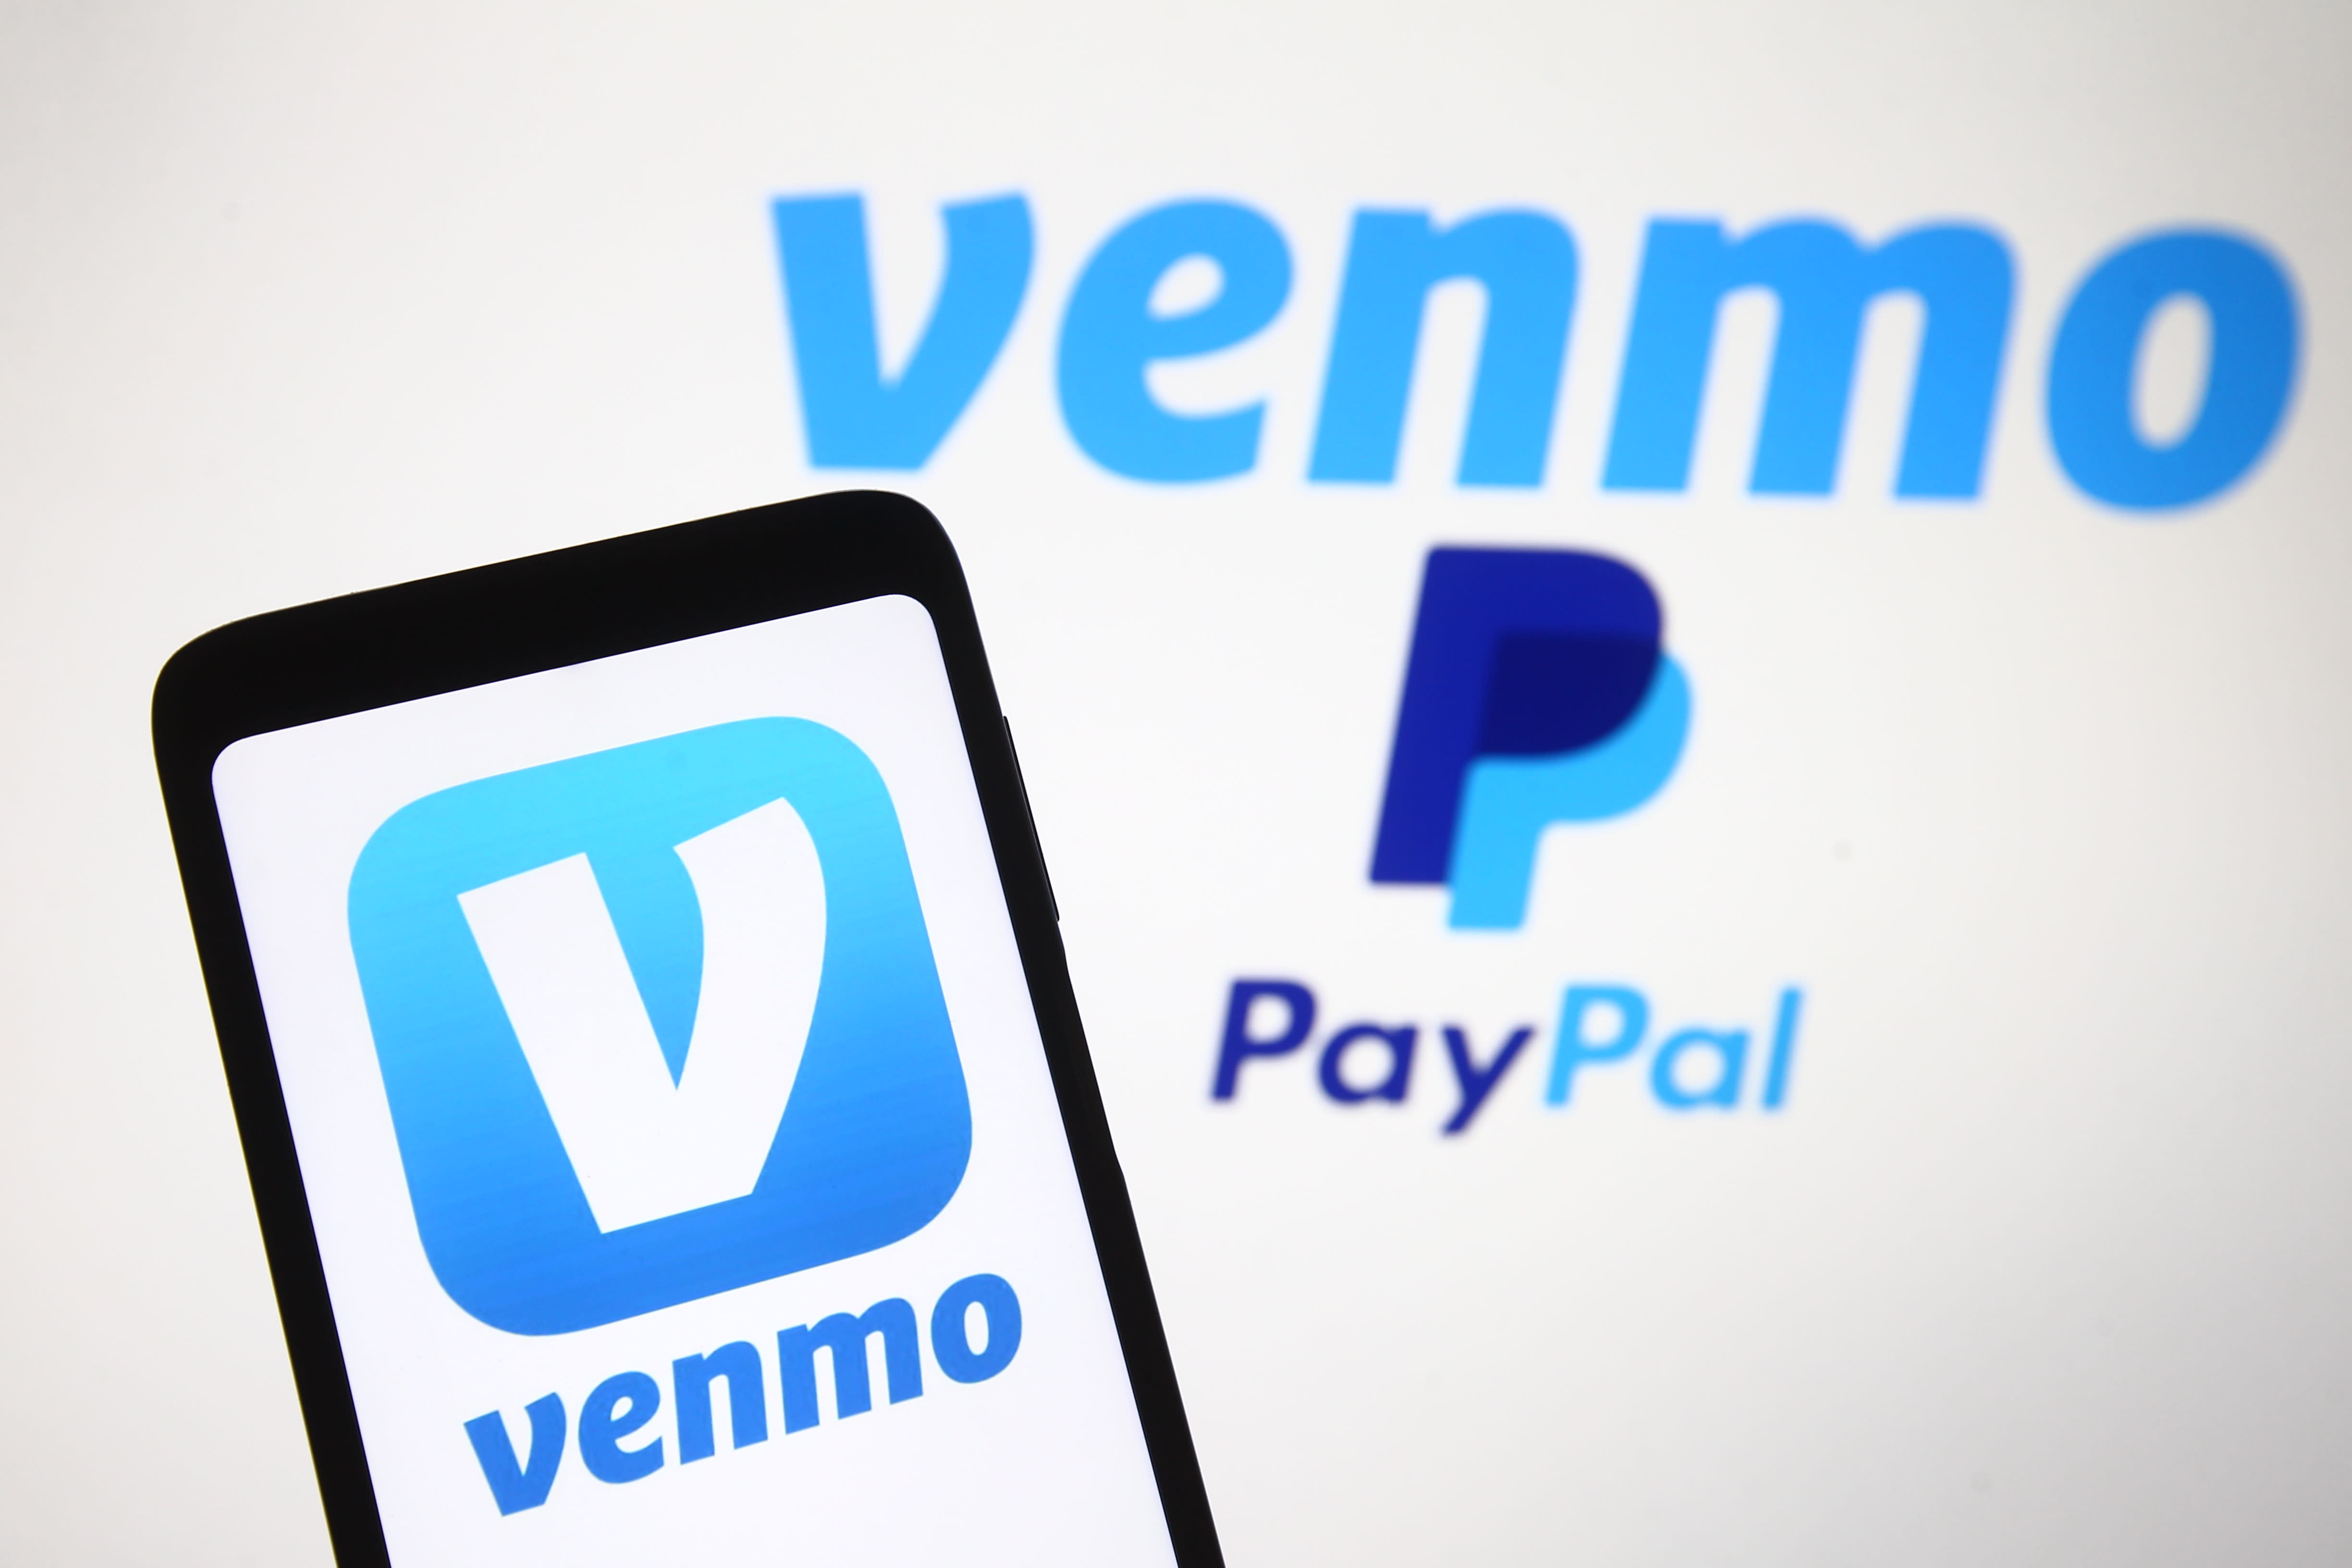 PayPal’s Venmo launches buy and sell cryptocurrencies